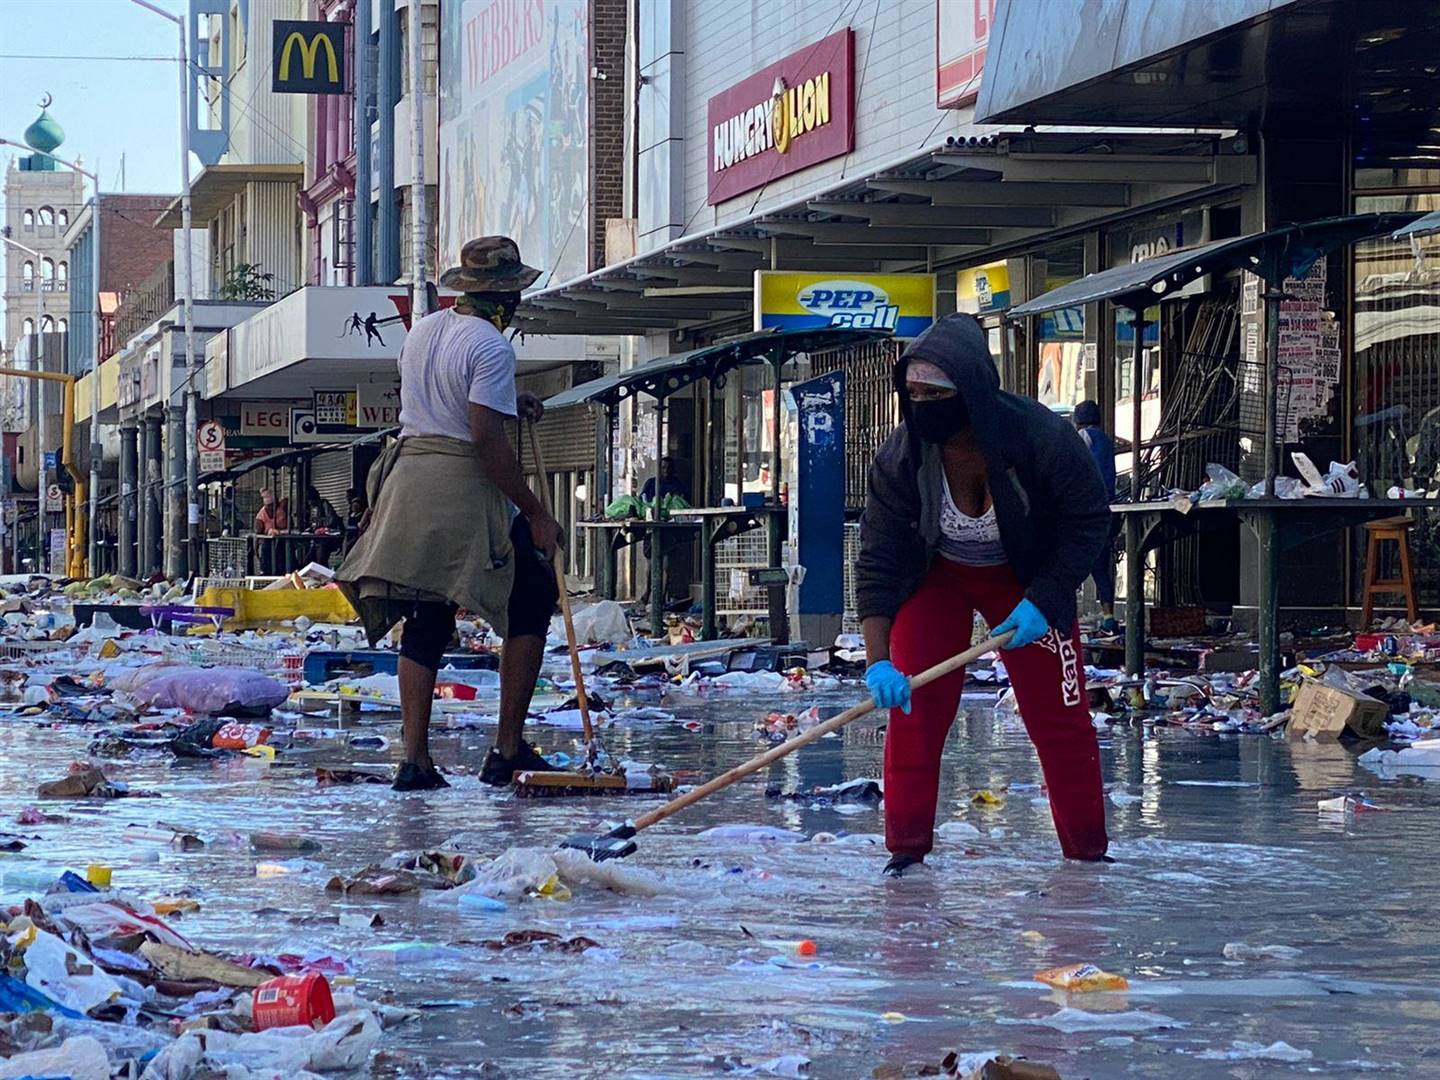 Taxi drivers and residents of Durban help to clean up the city in the wake of looting and destruction.